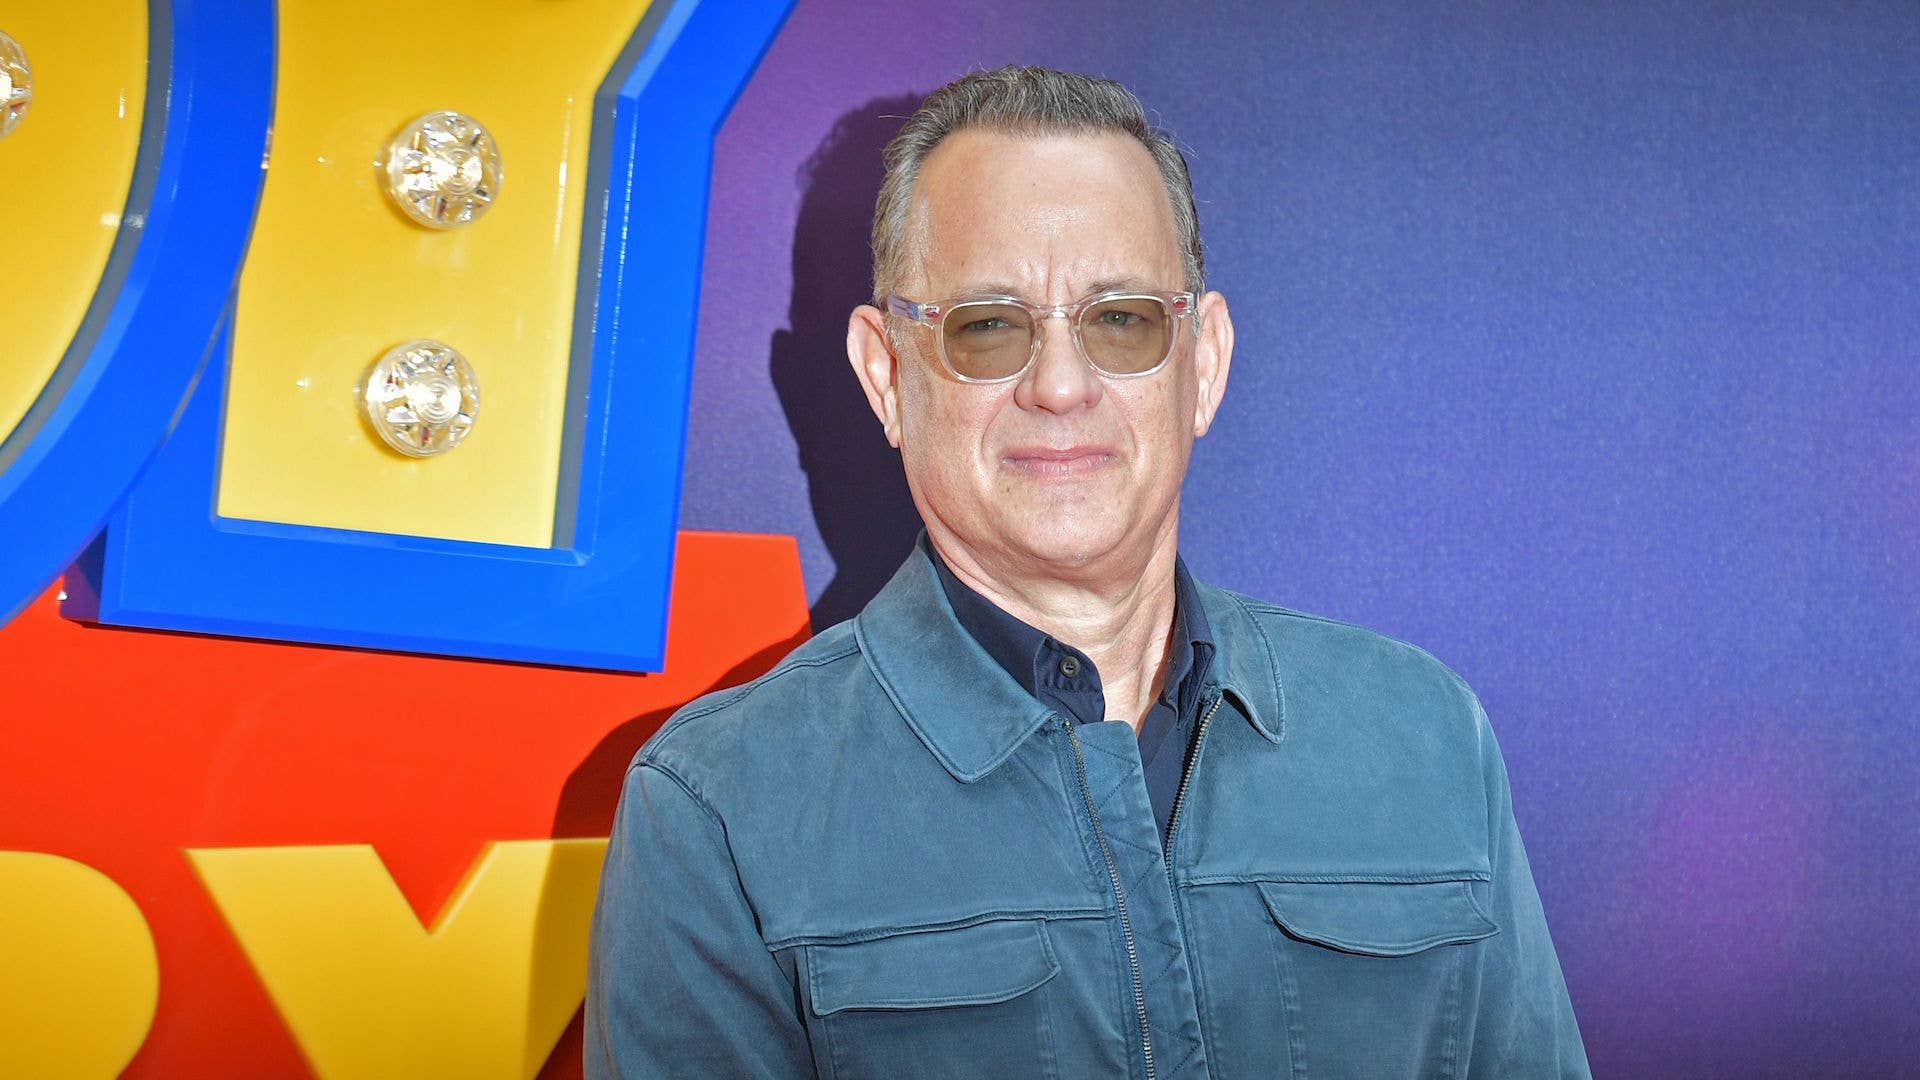 Tom Hanks on the red carpet upon arriving for the European premiere of the film Toy Story 4.